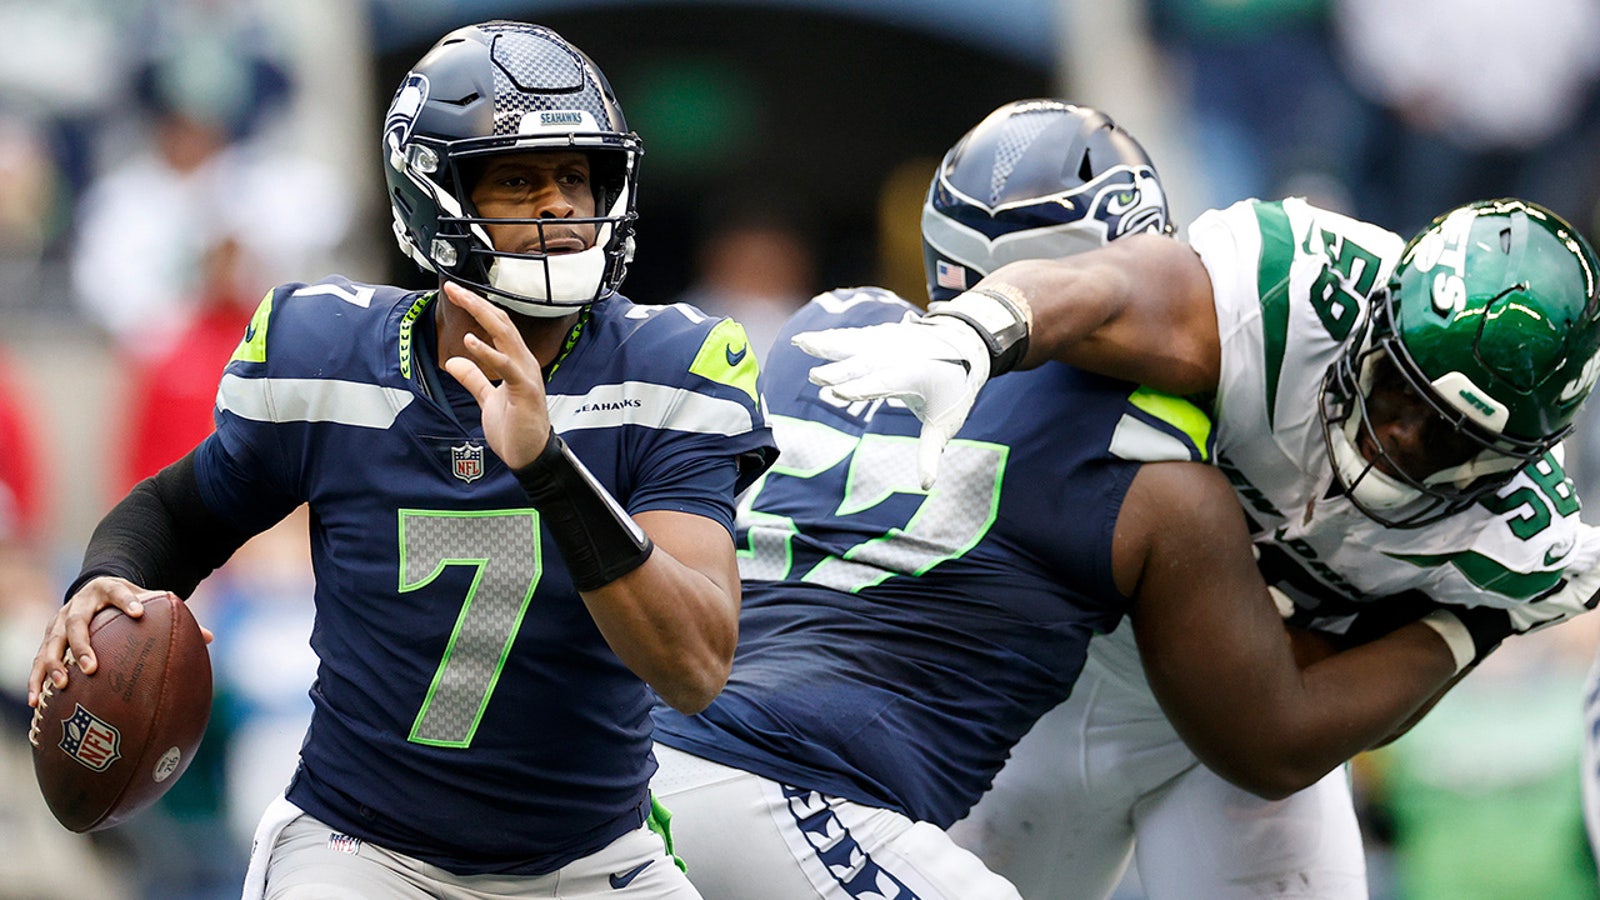 Should you bet on Geno Smith and the Seahawks at home against the Rams?